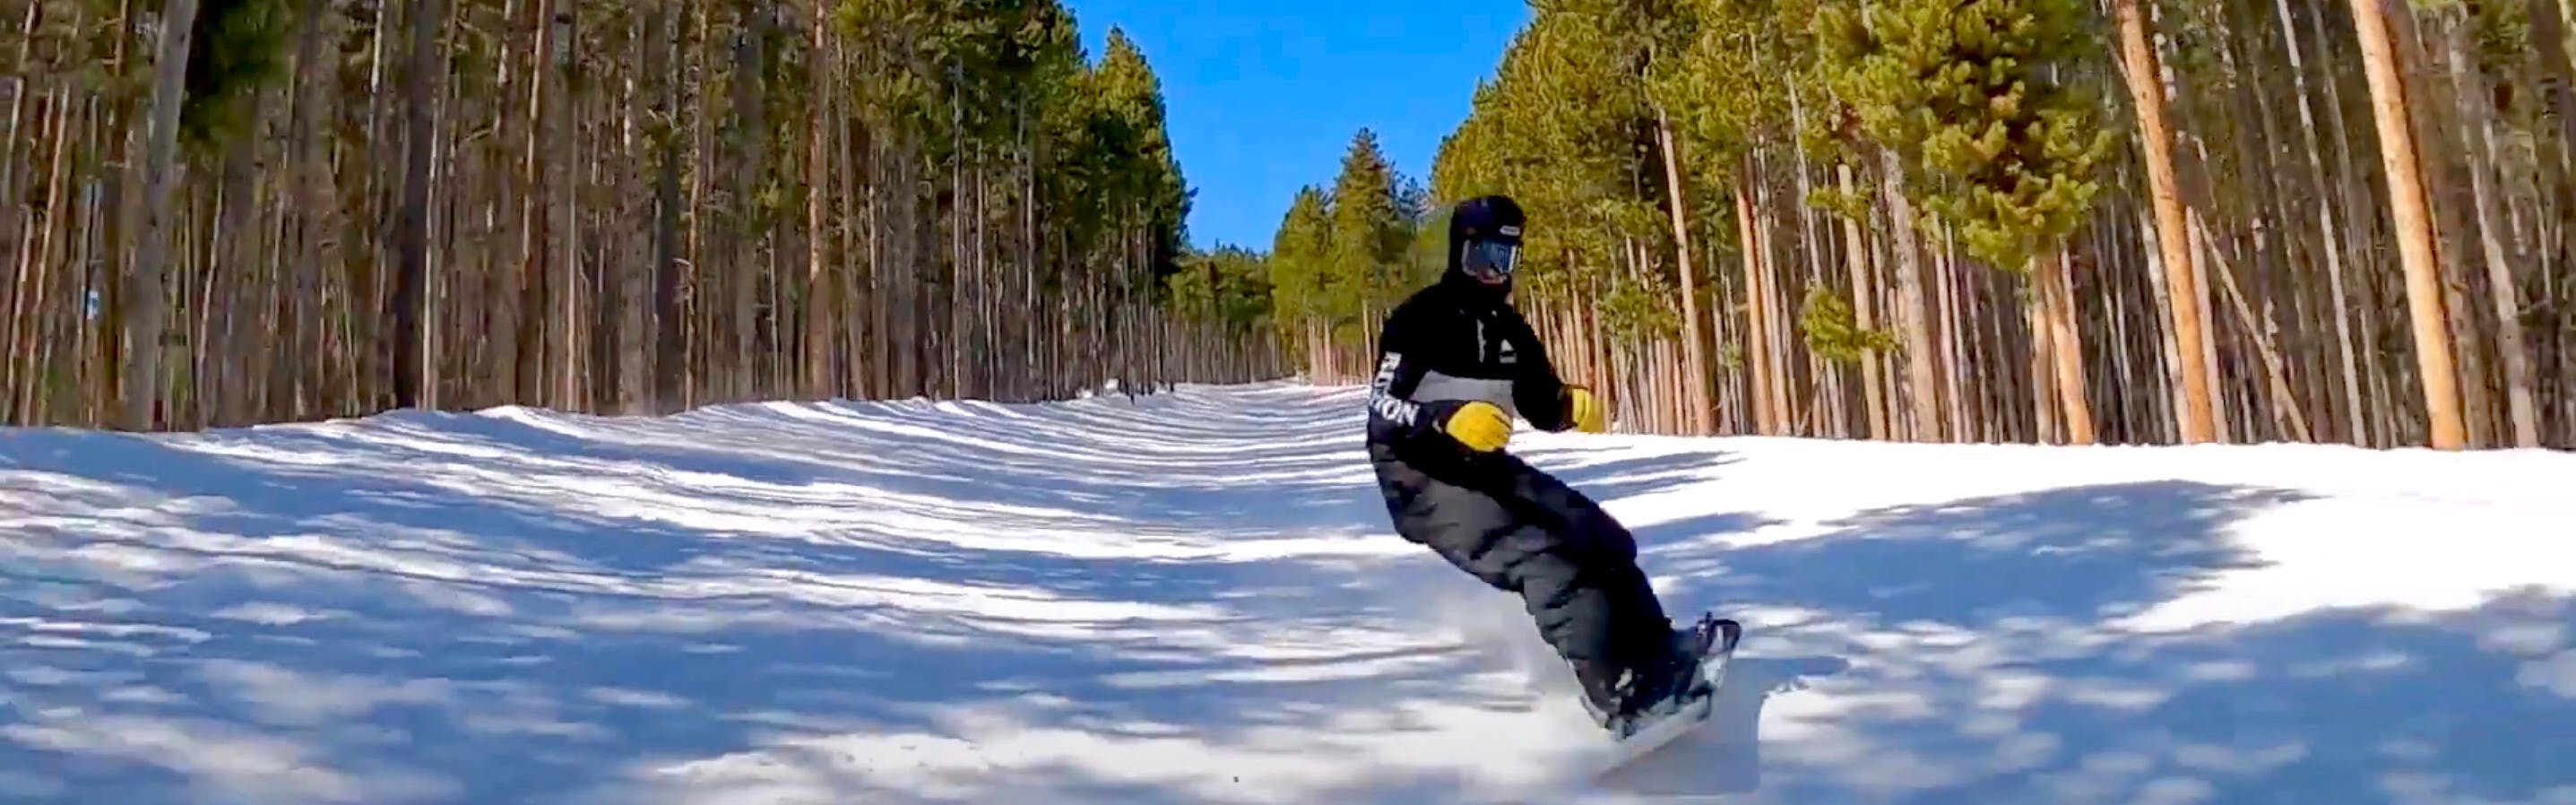 A screenshot of the YouTube video shows Bobby riding downhill in an open space between dense forest. The sky is a brilliant blue behind him.